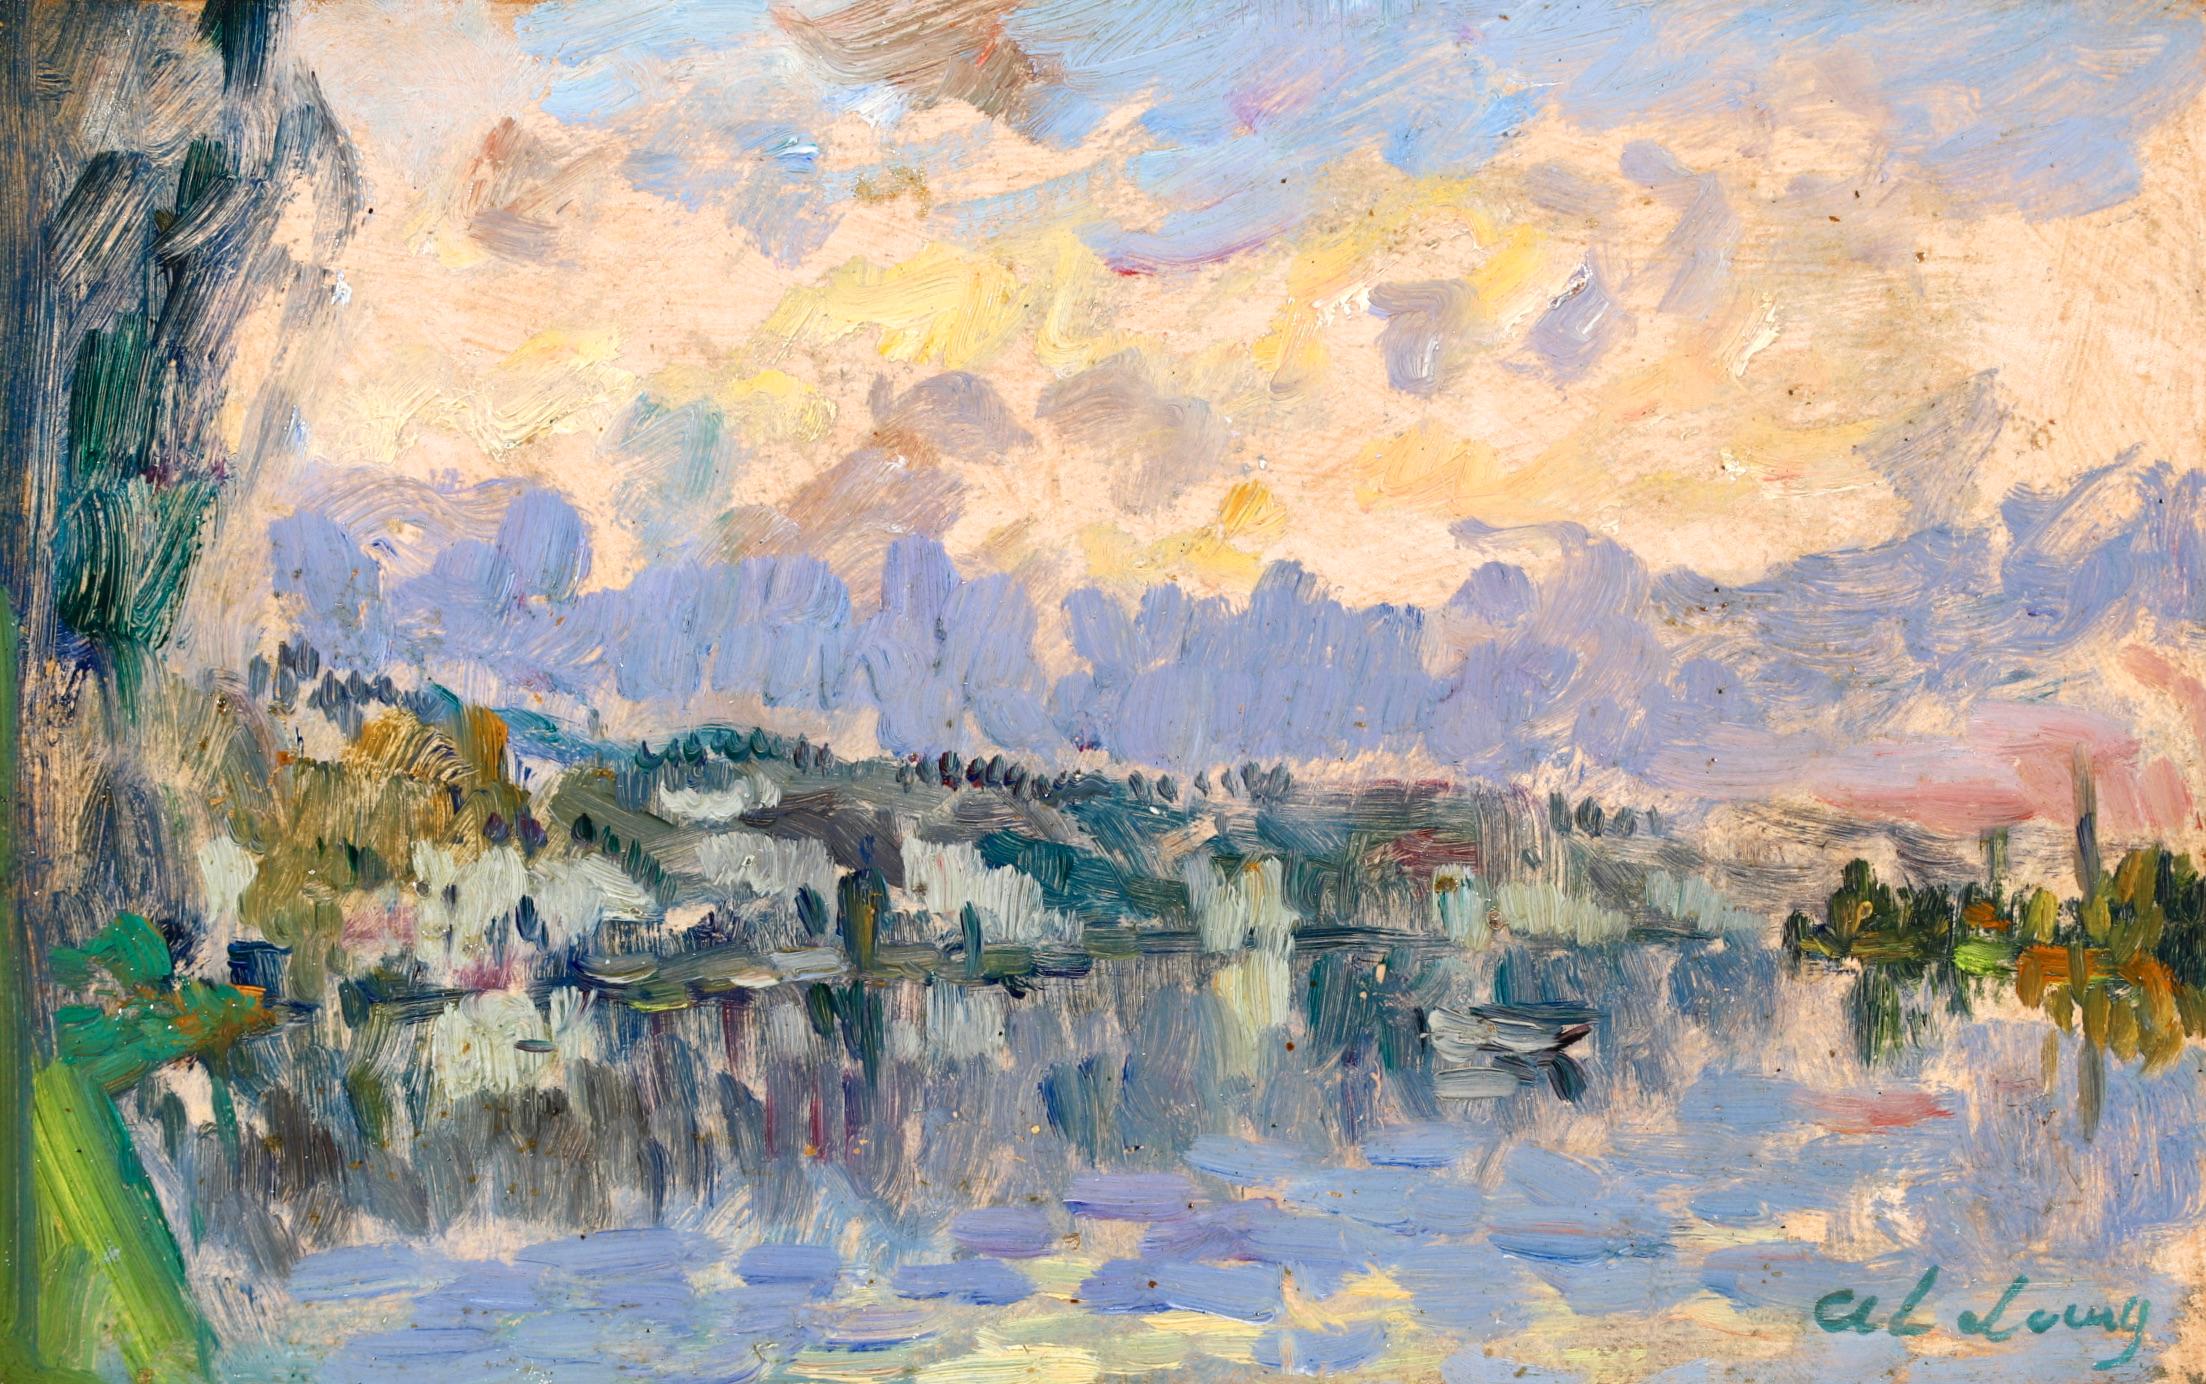 Signed oil on canvas riverscape circa 1890 by French post impressionist painter Albert Charles Lebourg. The work depicts a view of the river Seine near Rouen. The clouds in the sky are illuminated in warm tones of yellow and peach from the light of